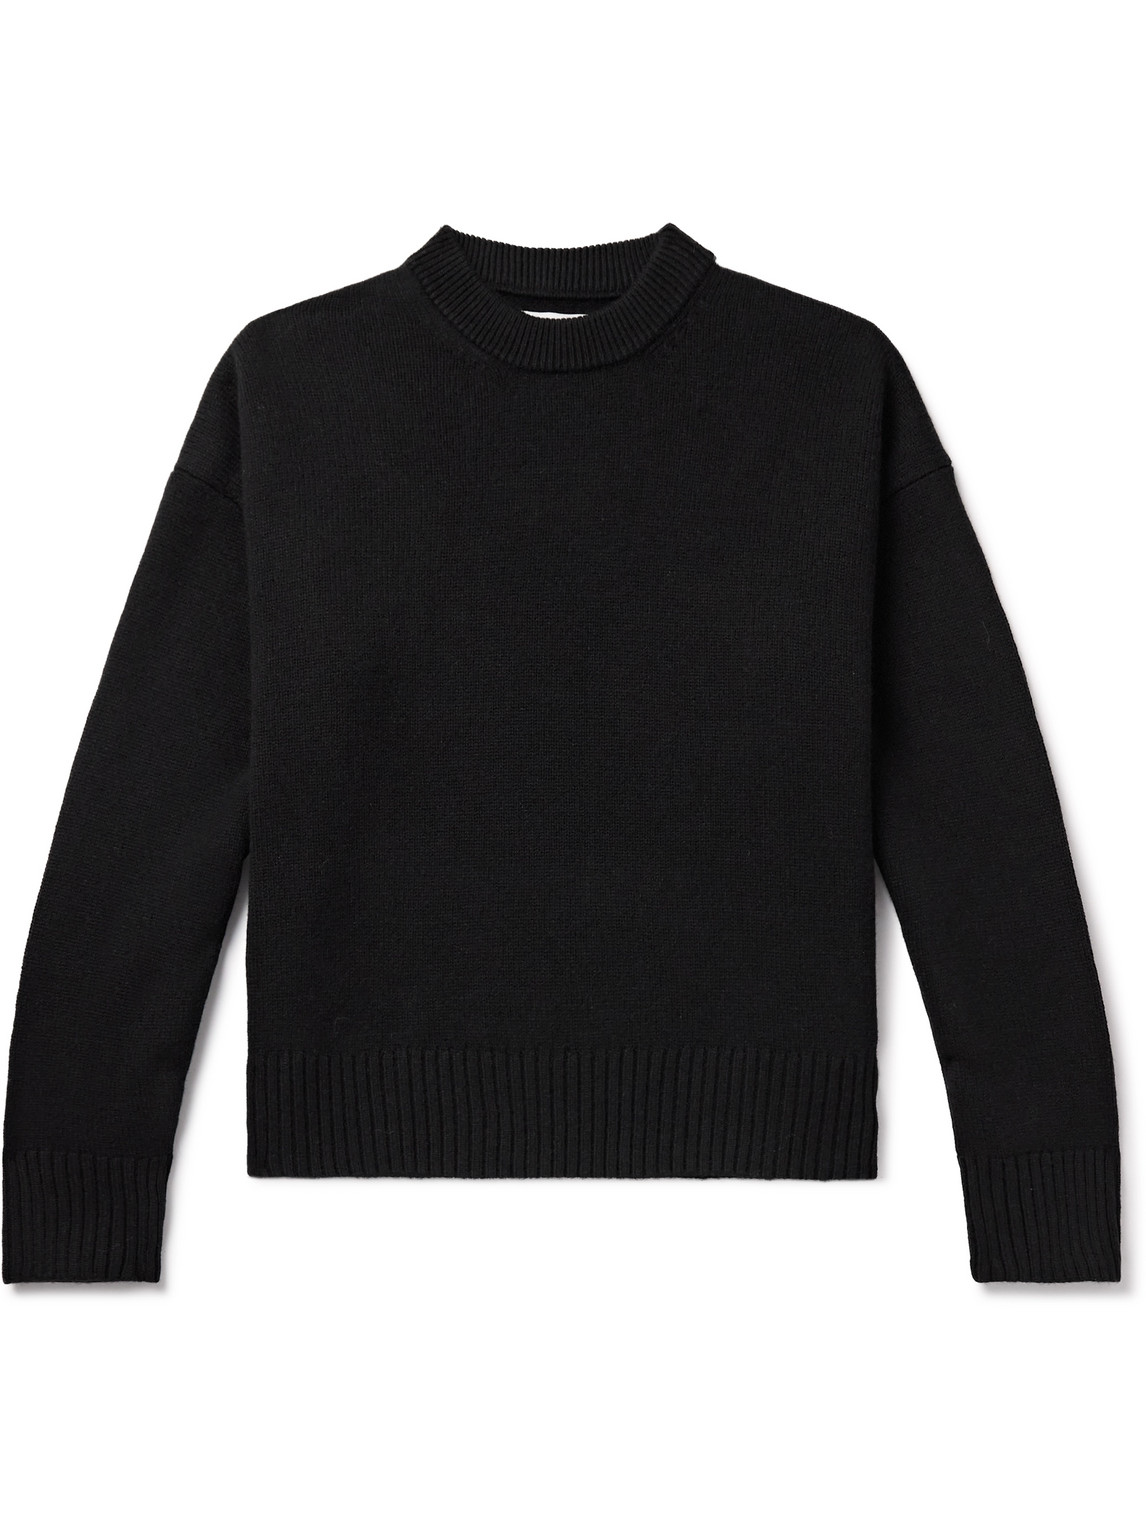 Merino Wool and Cashmere-Blend Sweater